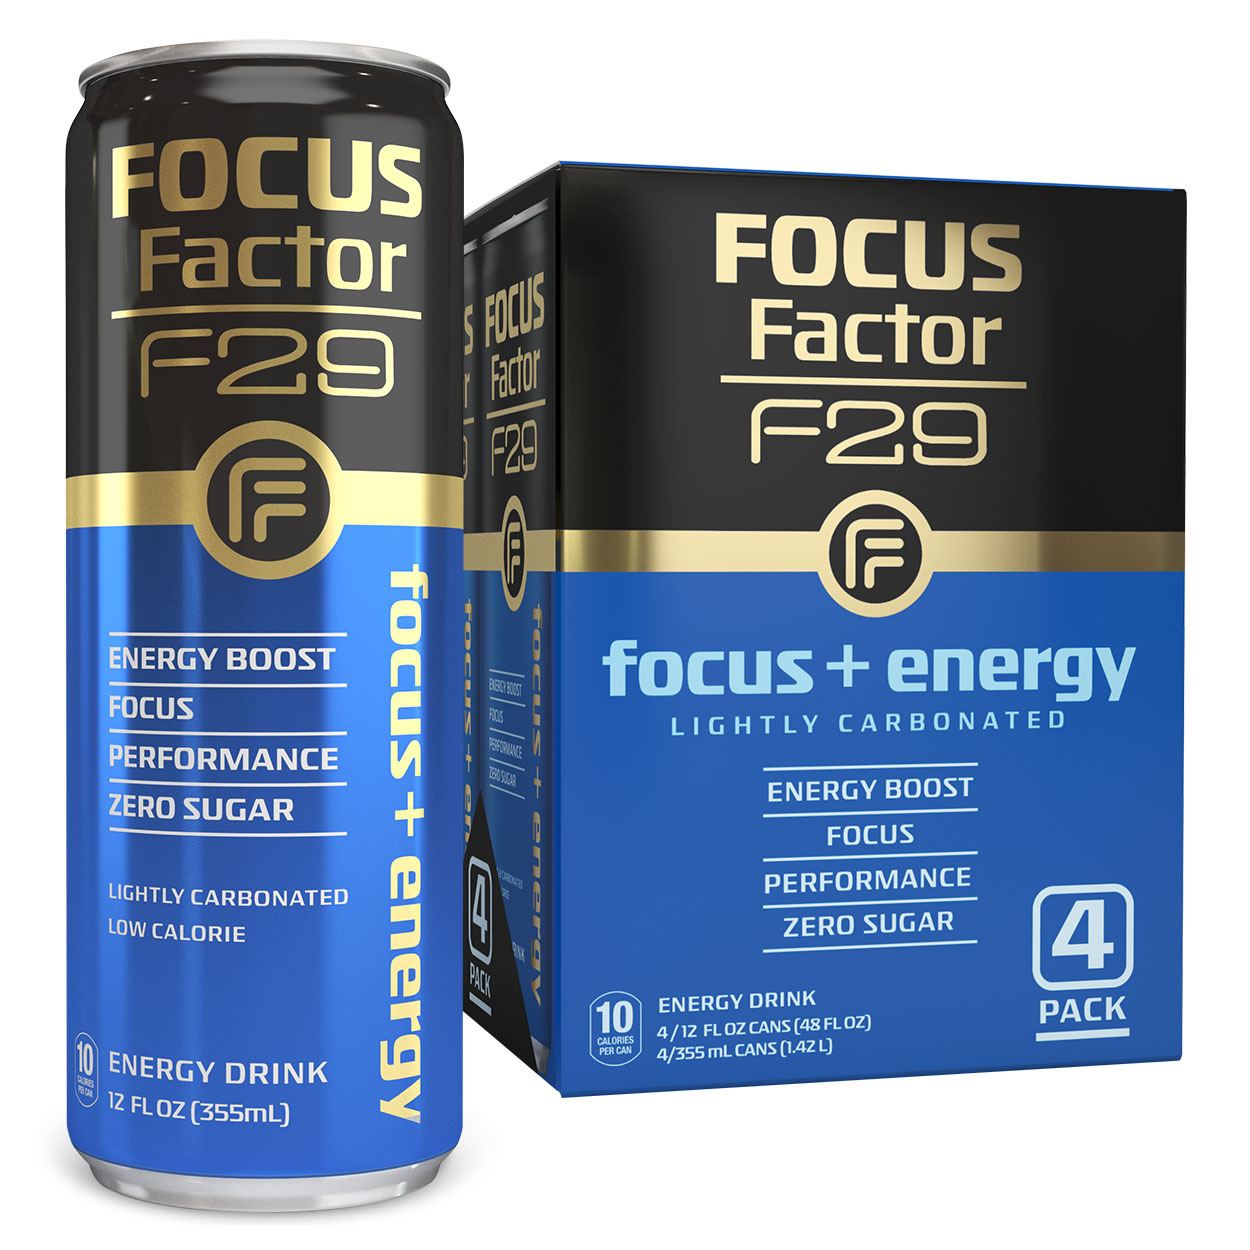 Boost energy and focus